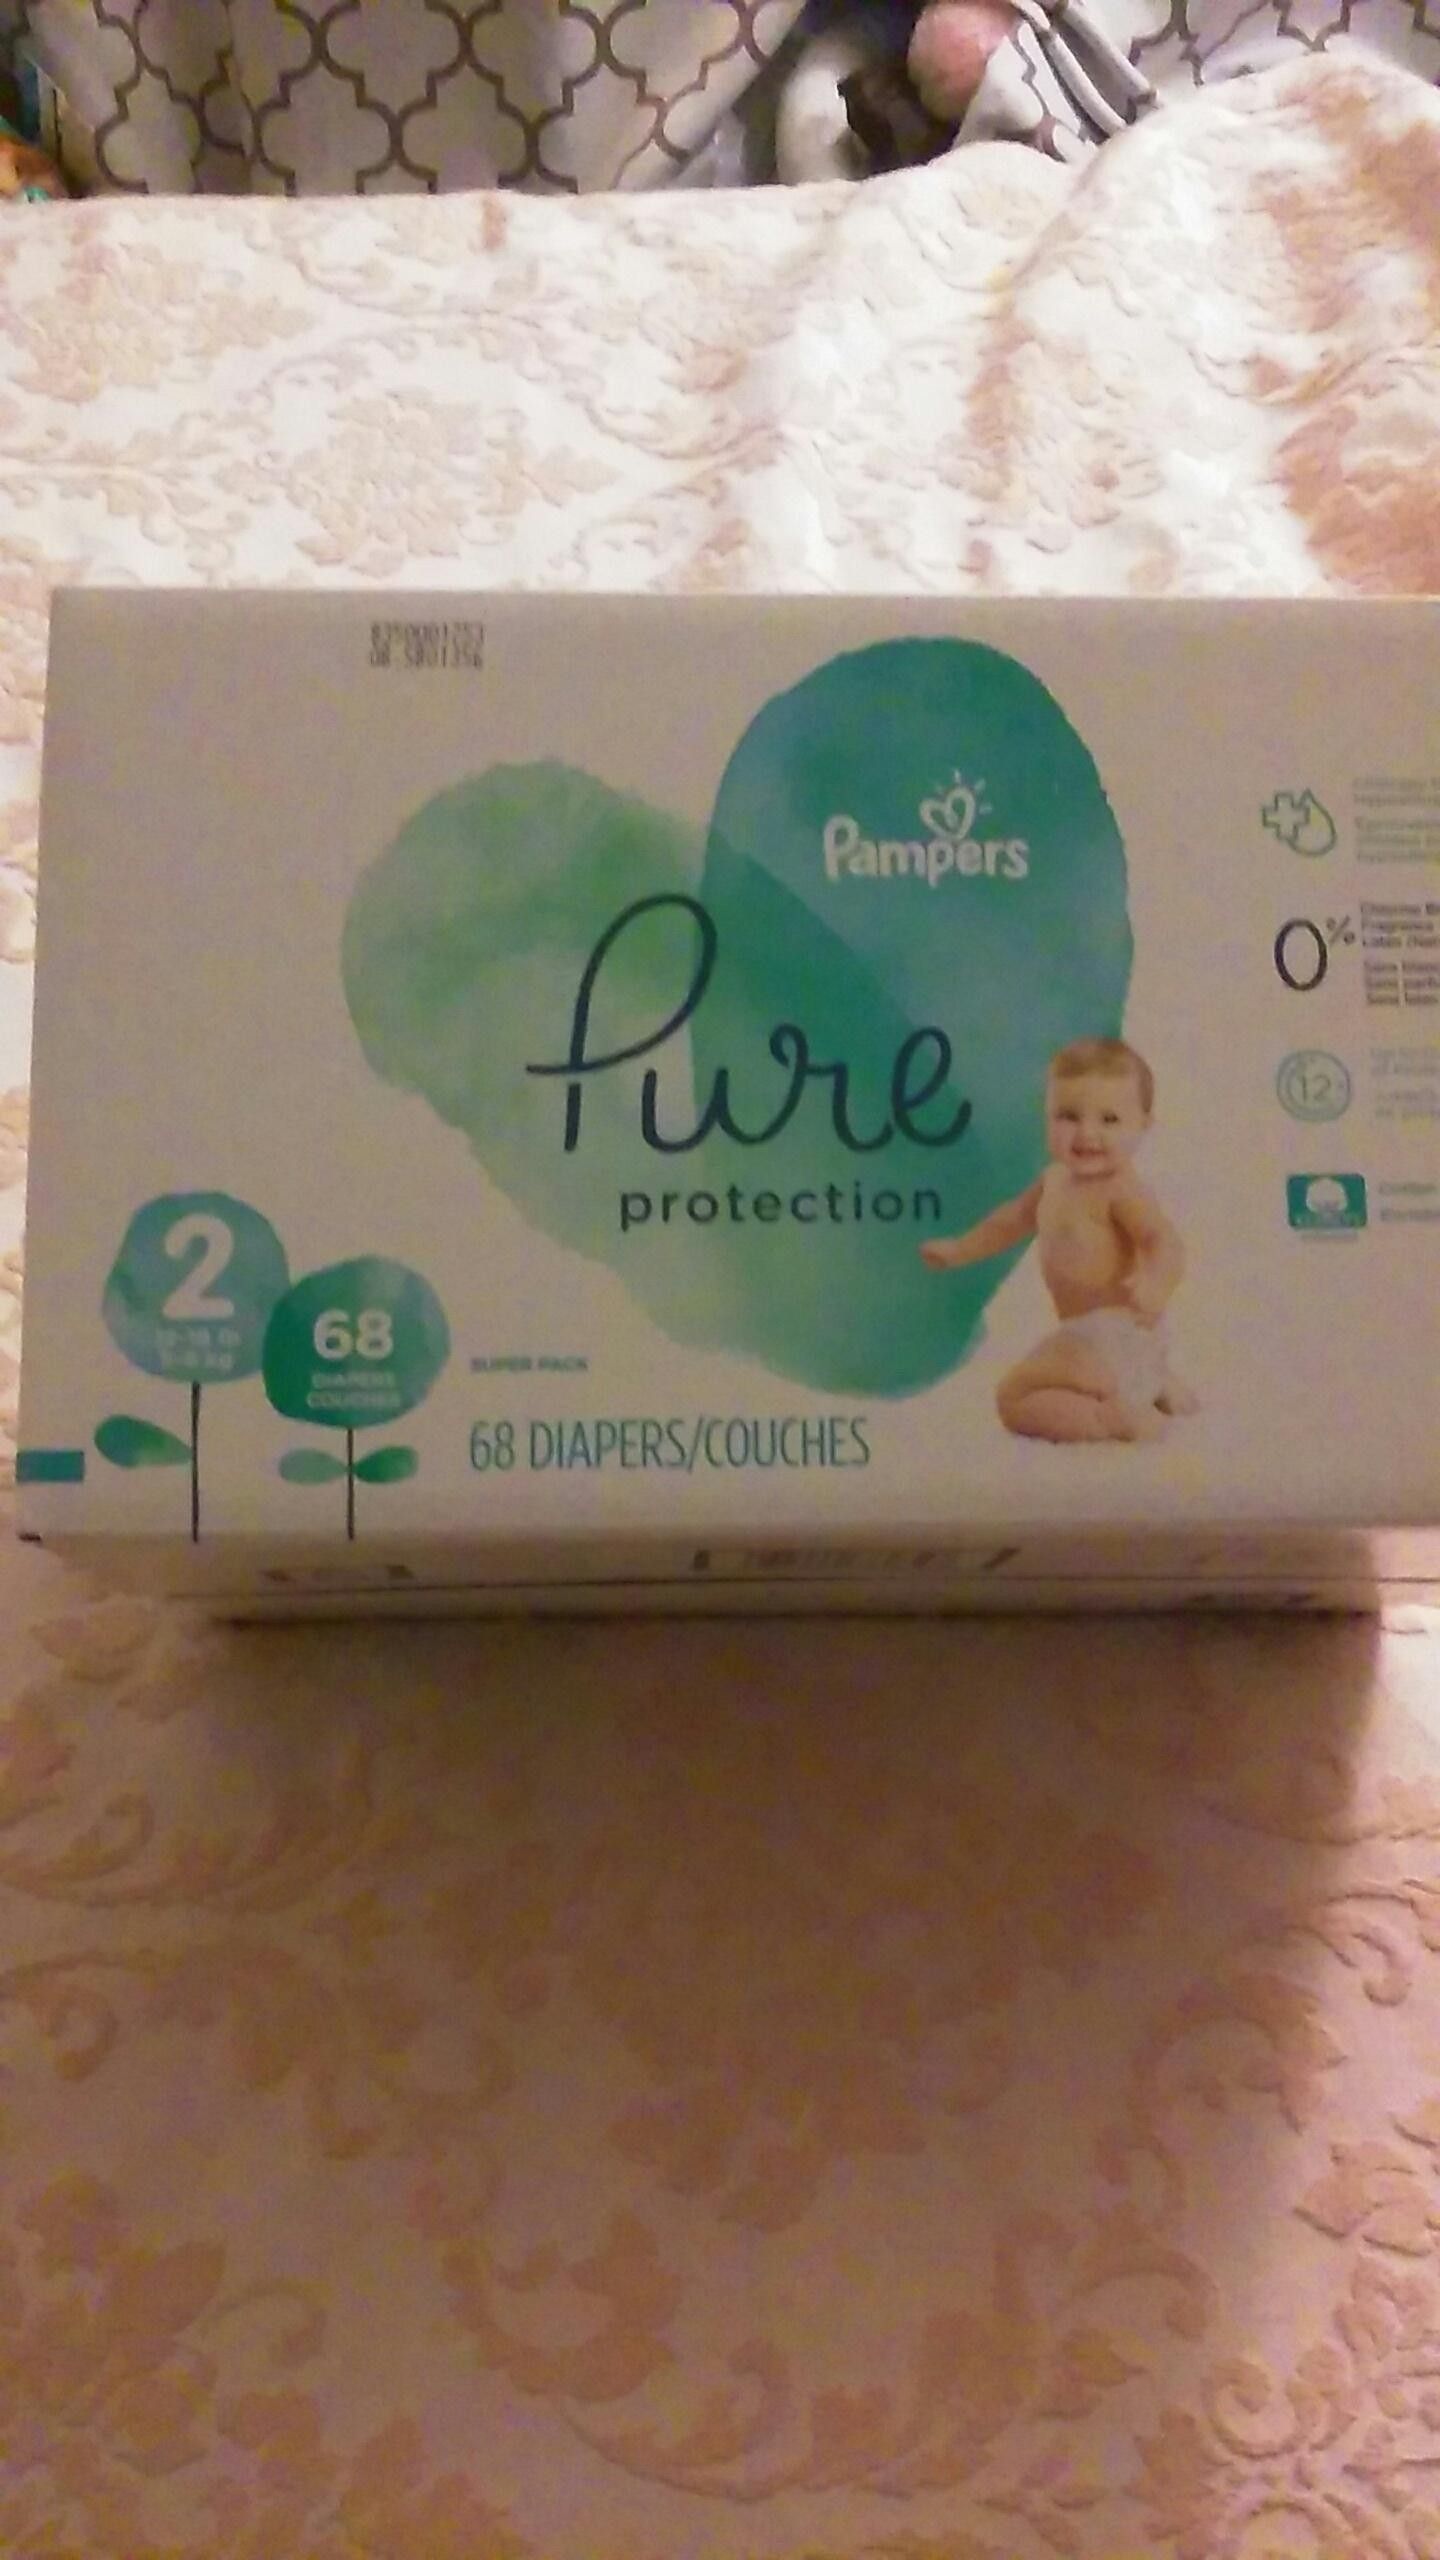 Sz 2 Pampers Pure Protection diapers